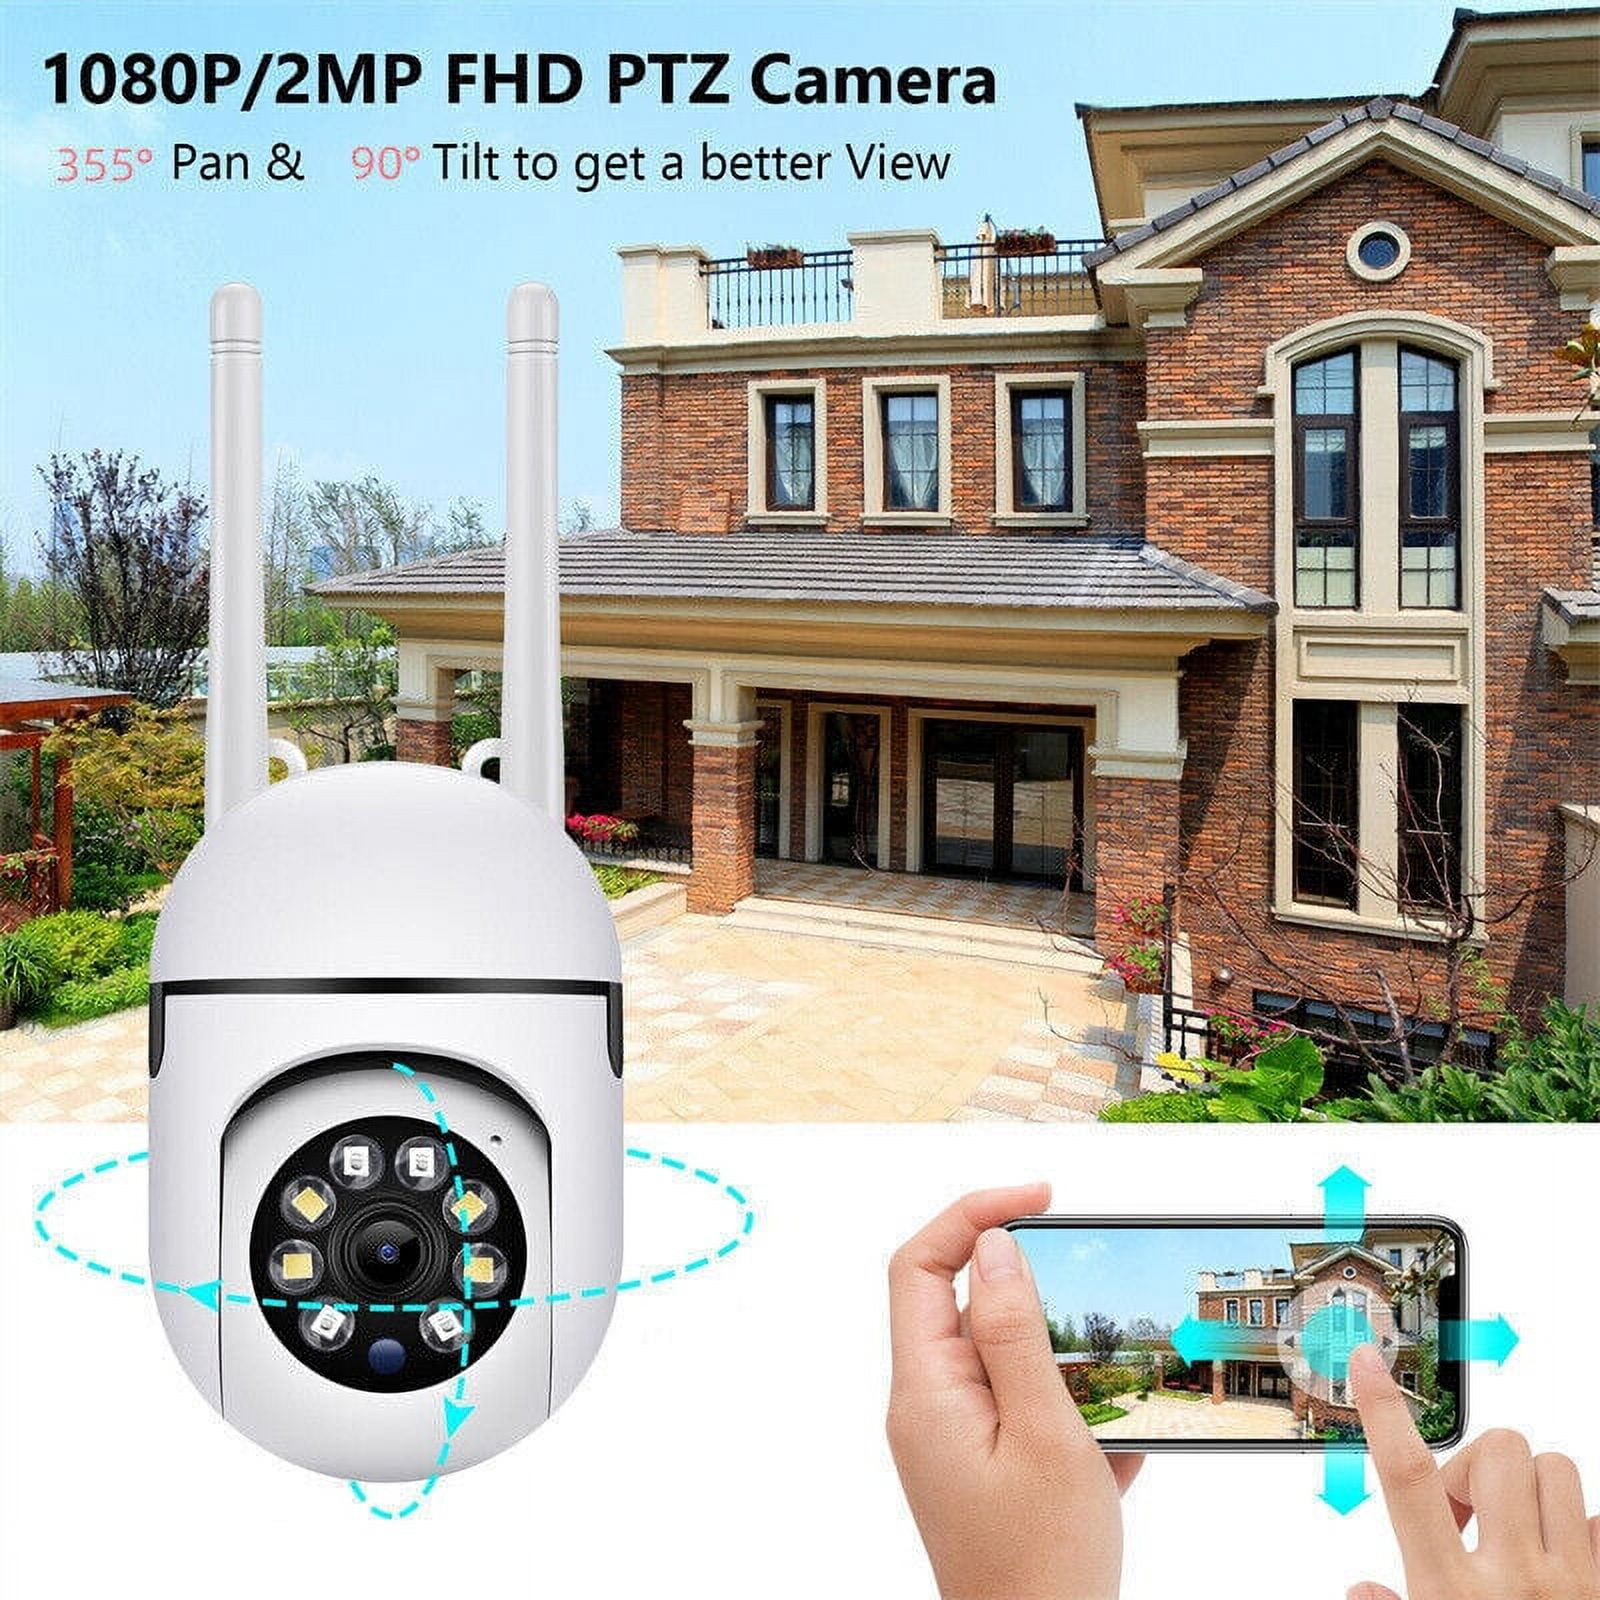 5G Camera Outdoor wifi Security Camera,5Ghz/2.4Ghz Dual Bands WiFi Home  Surveillance Camera,360° View Pan Tilt Camera,Auto Tracking,Two Way Talk,HD